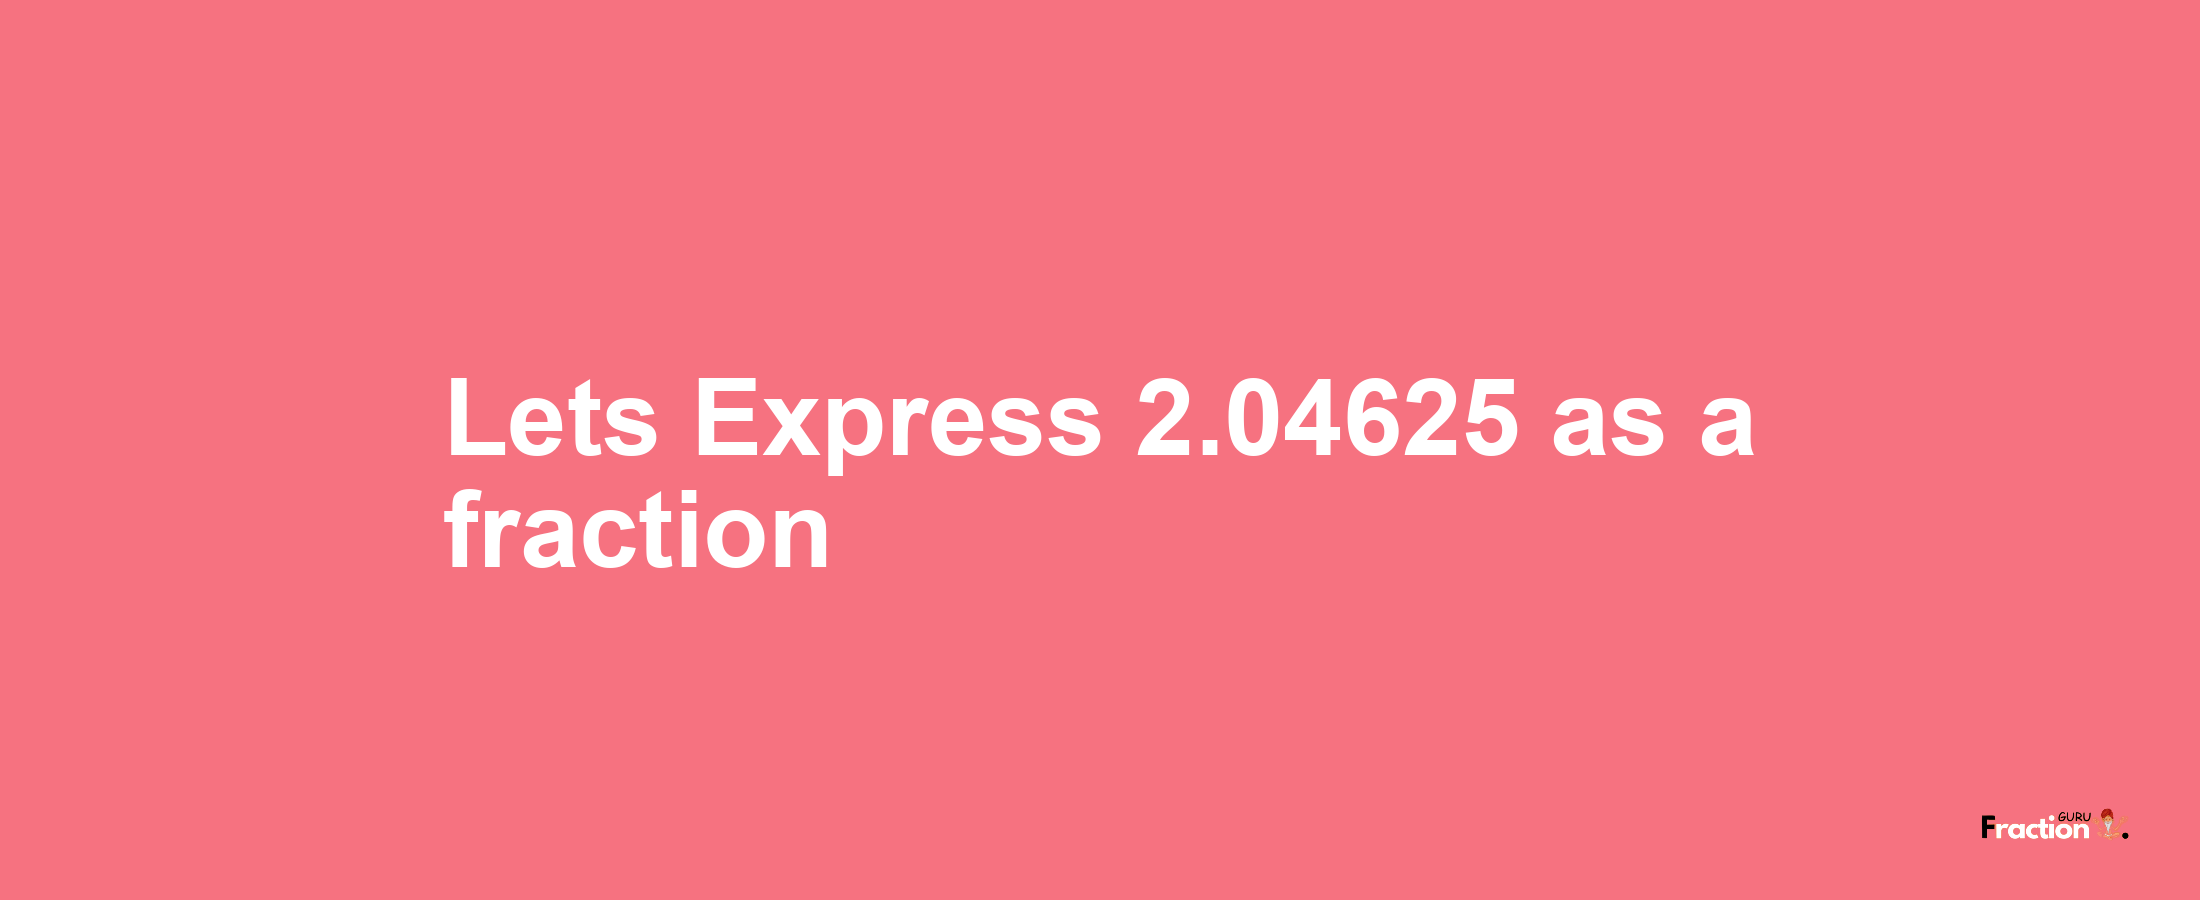 Lets Express 2.04625 as afraction